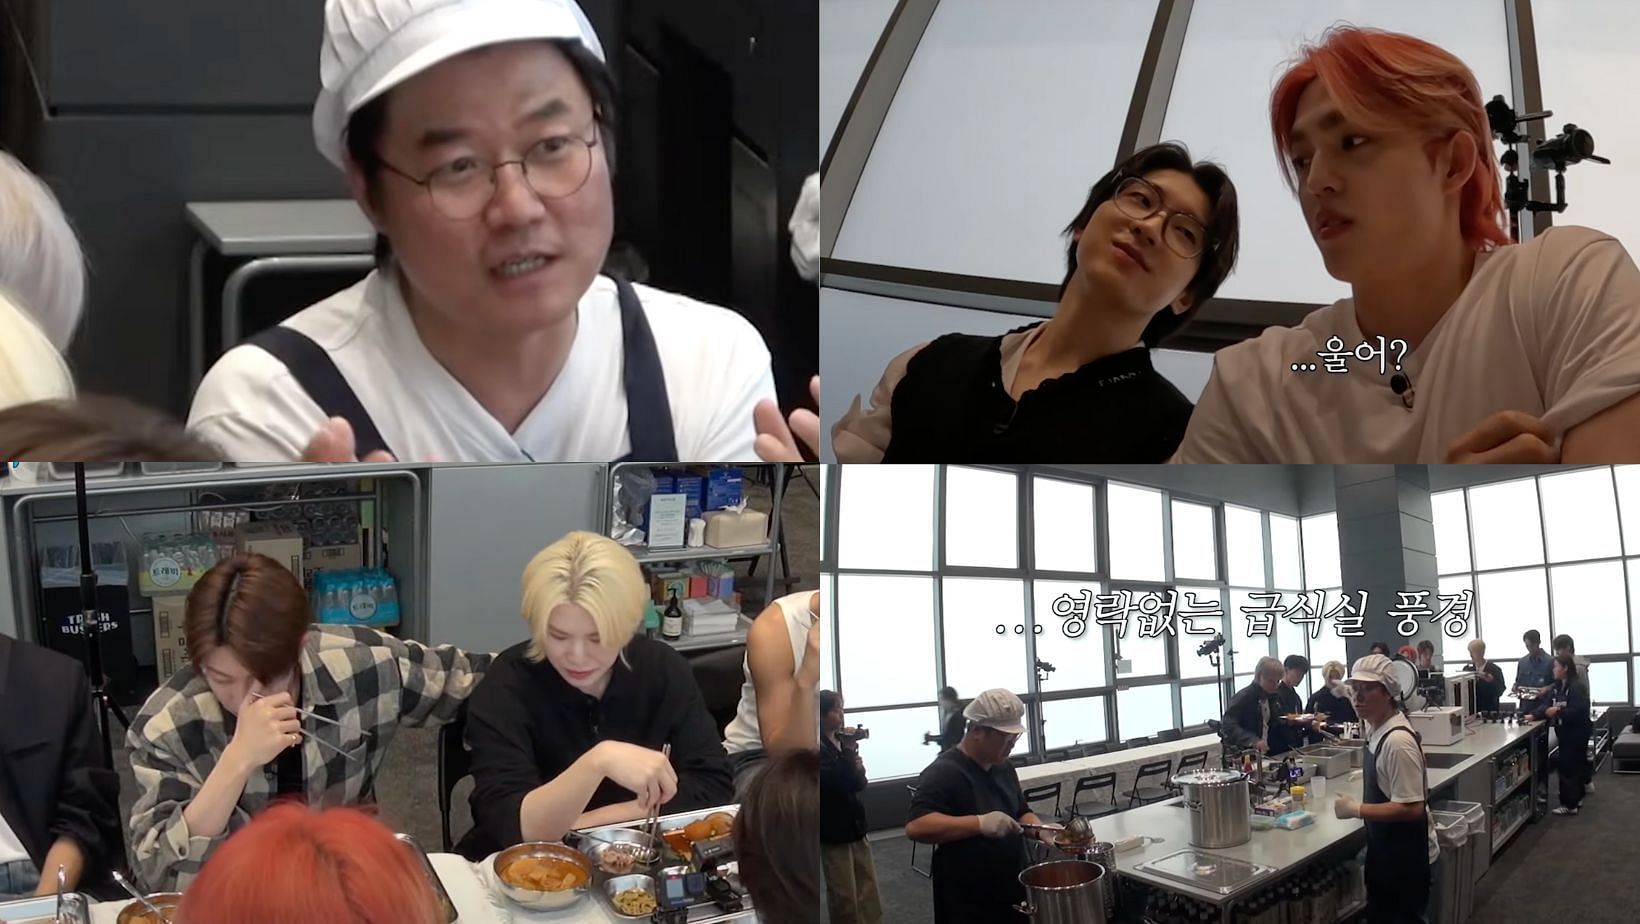 Na PD expresses his love for SEVENTEEN by cooking lunch for all 13 members. (Images via YouTube/channel fullmoon)